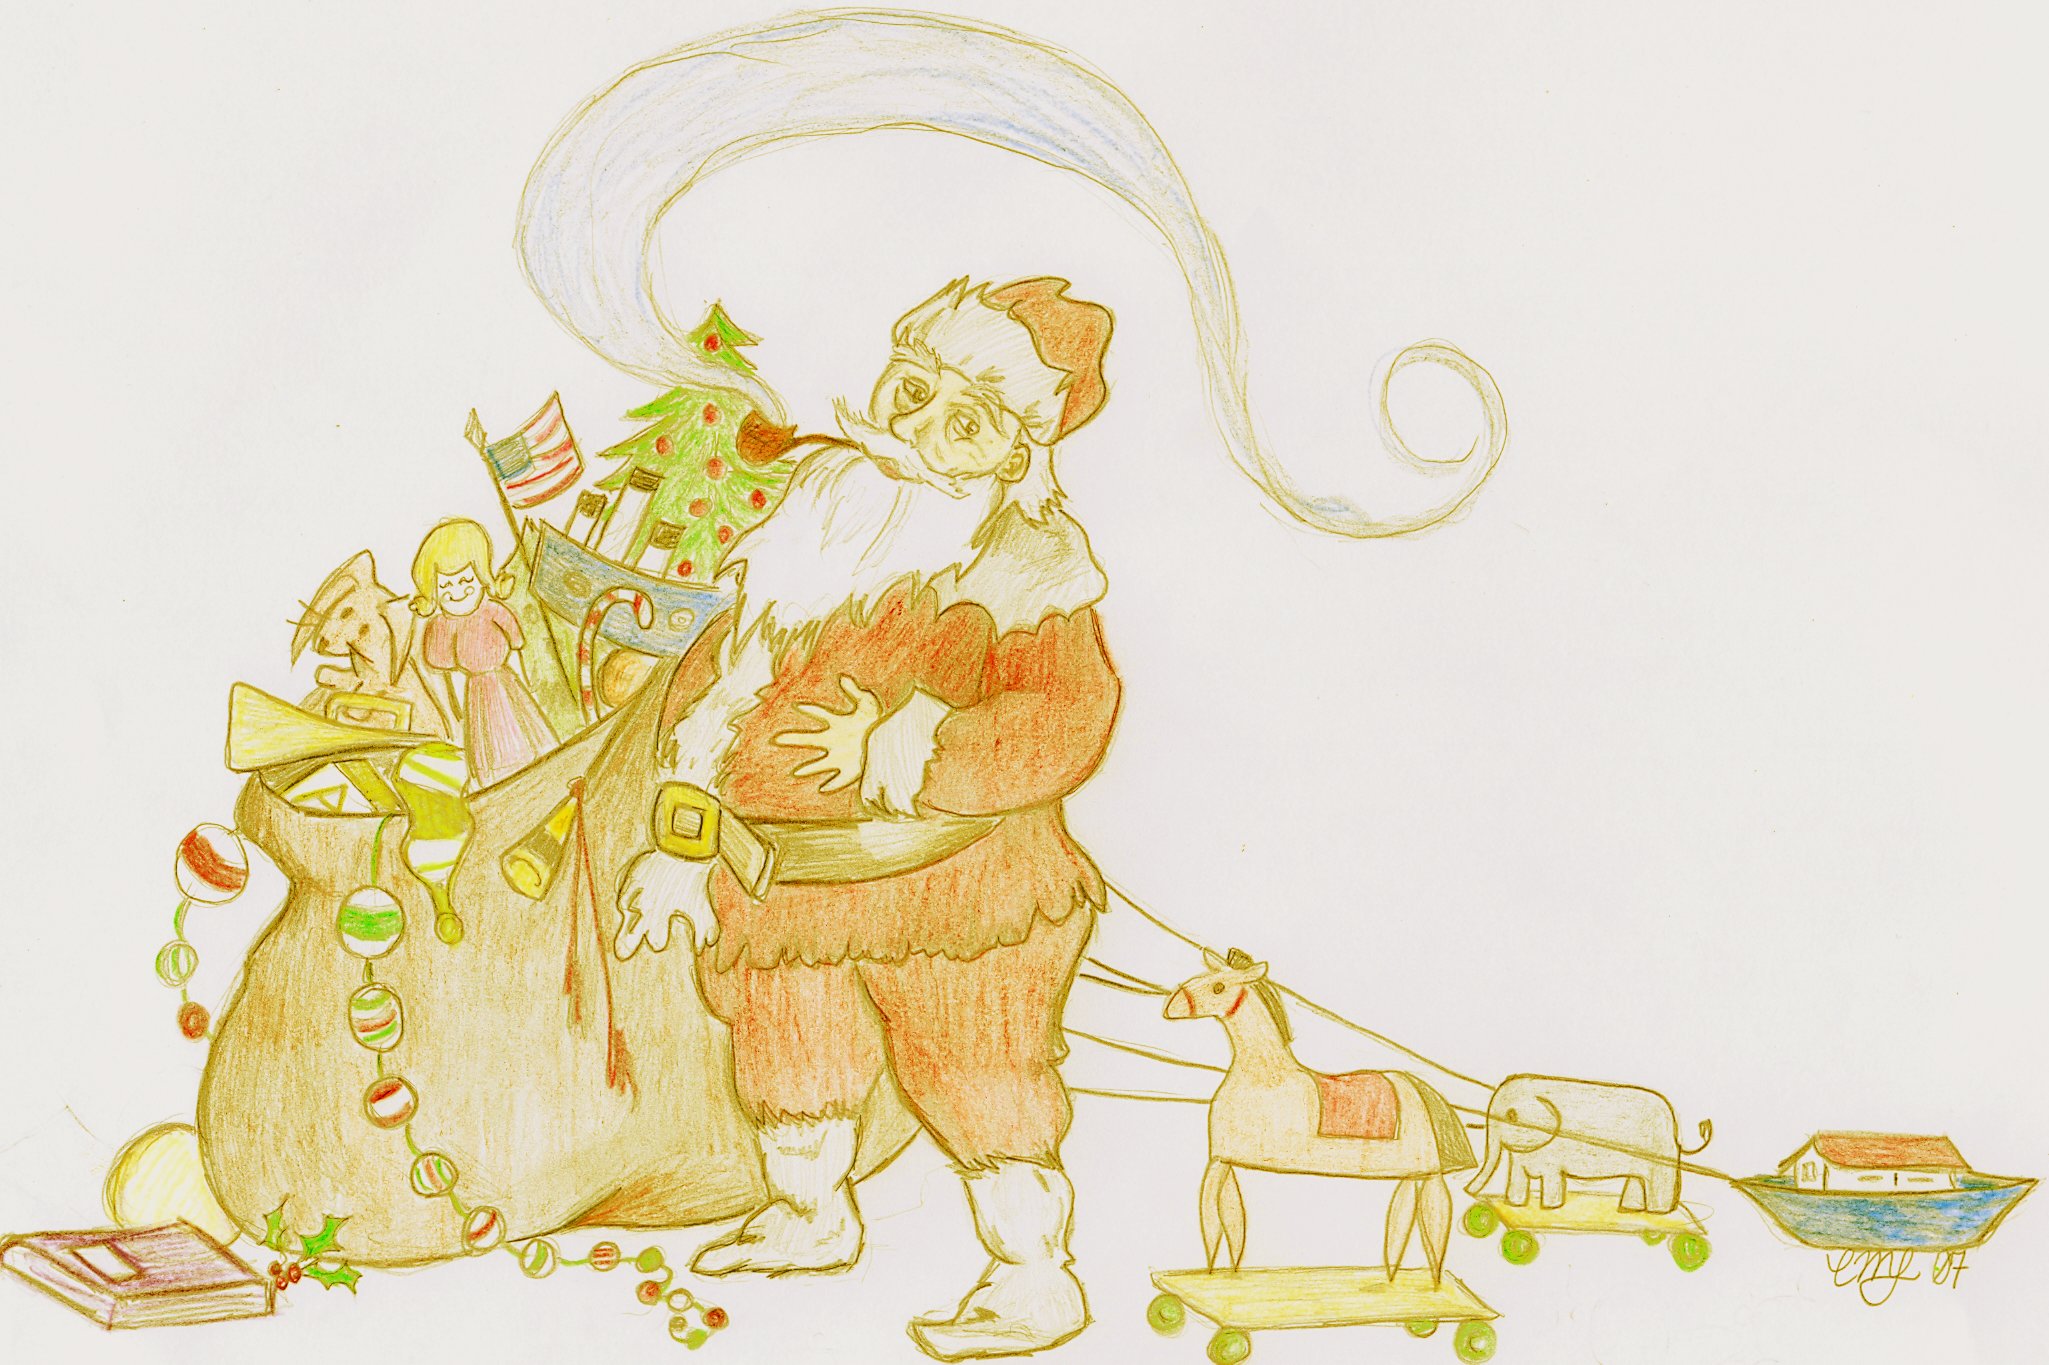 St. Nick by thelump